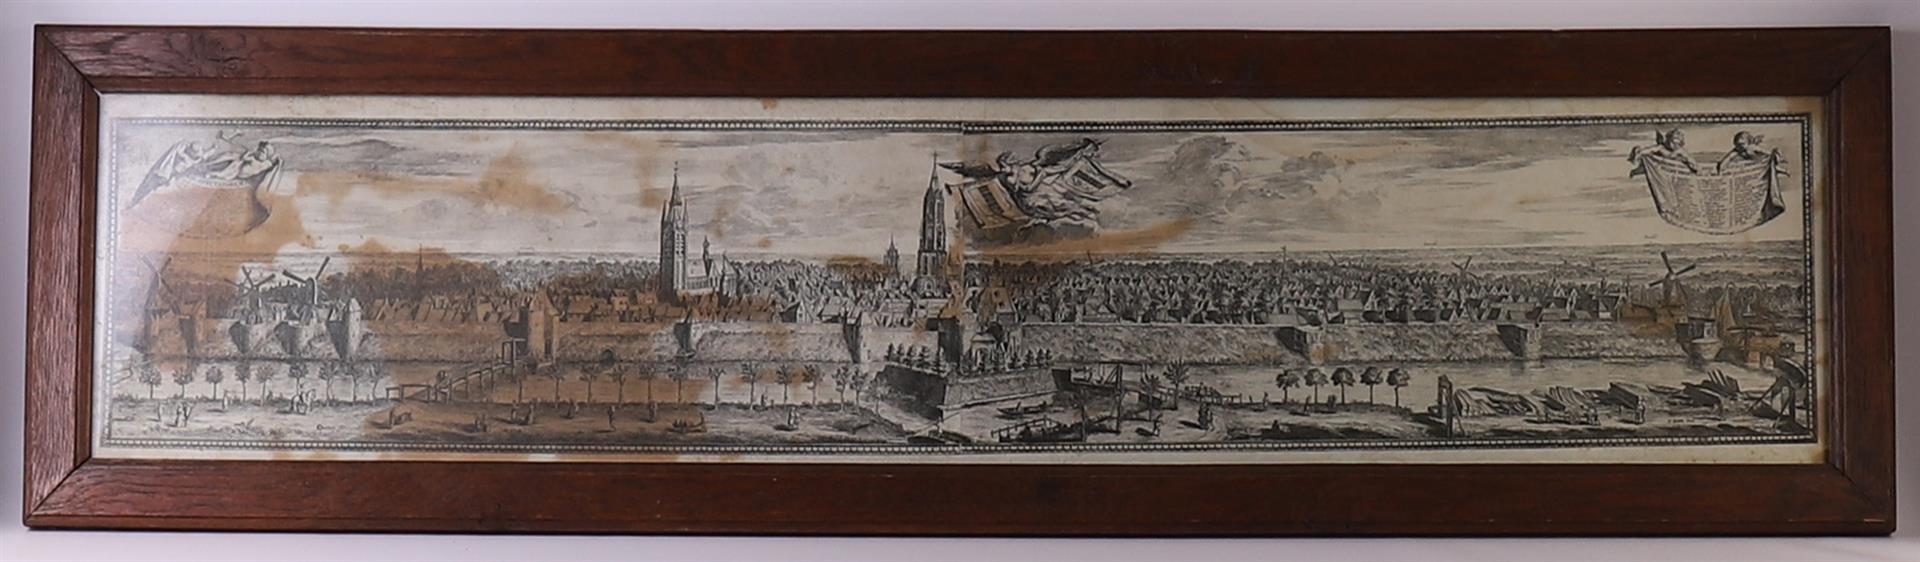 Decker, Coenraet"View of Delft", published by R. Boitet. 1729, engraving/paper h 23.6 x w123.5 cm (